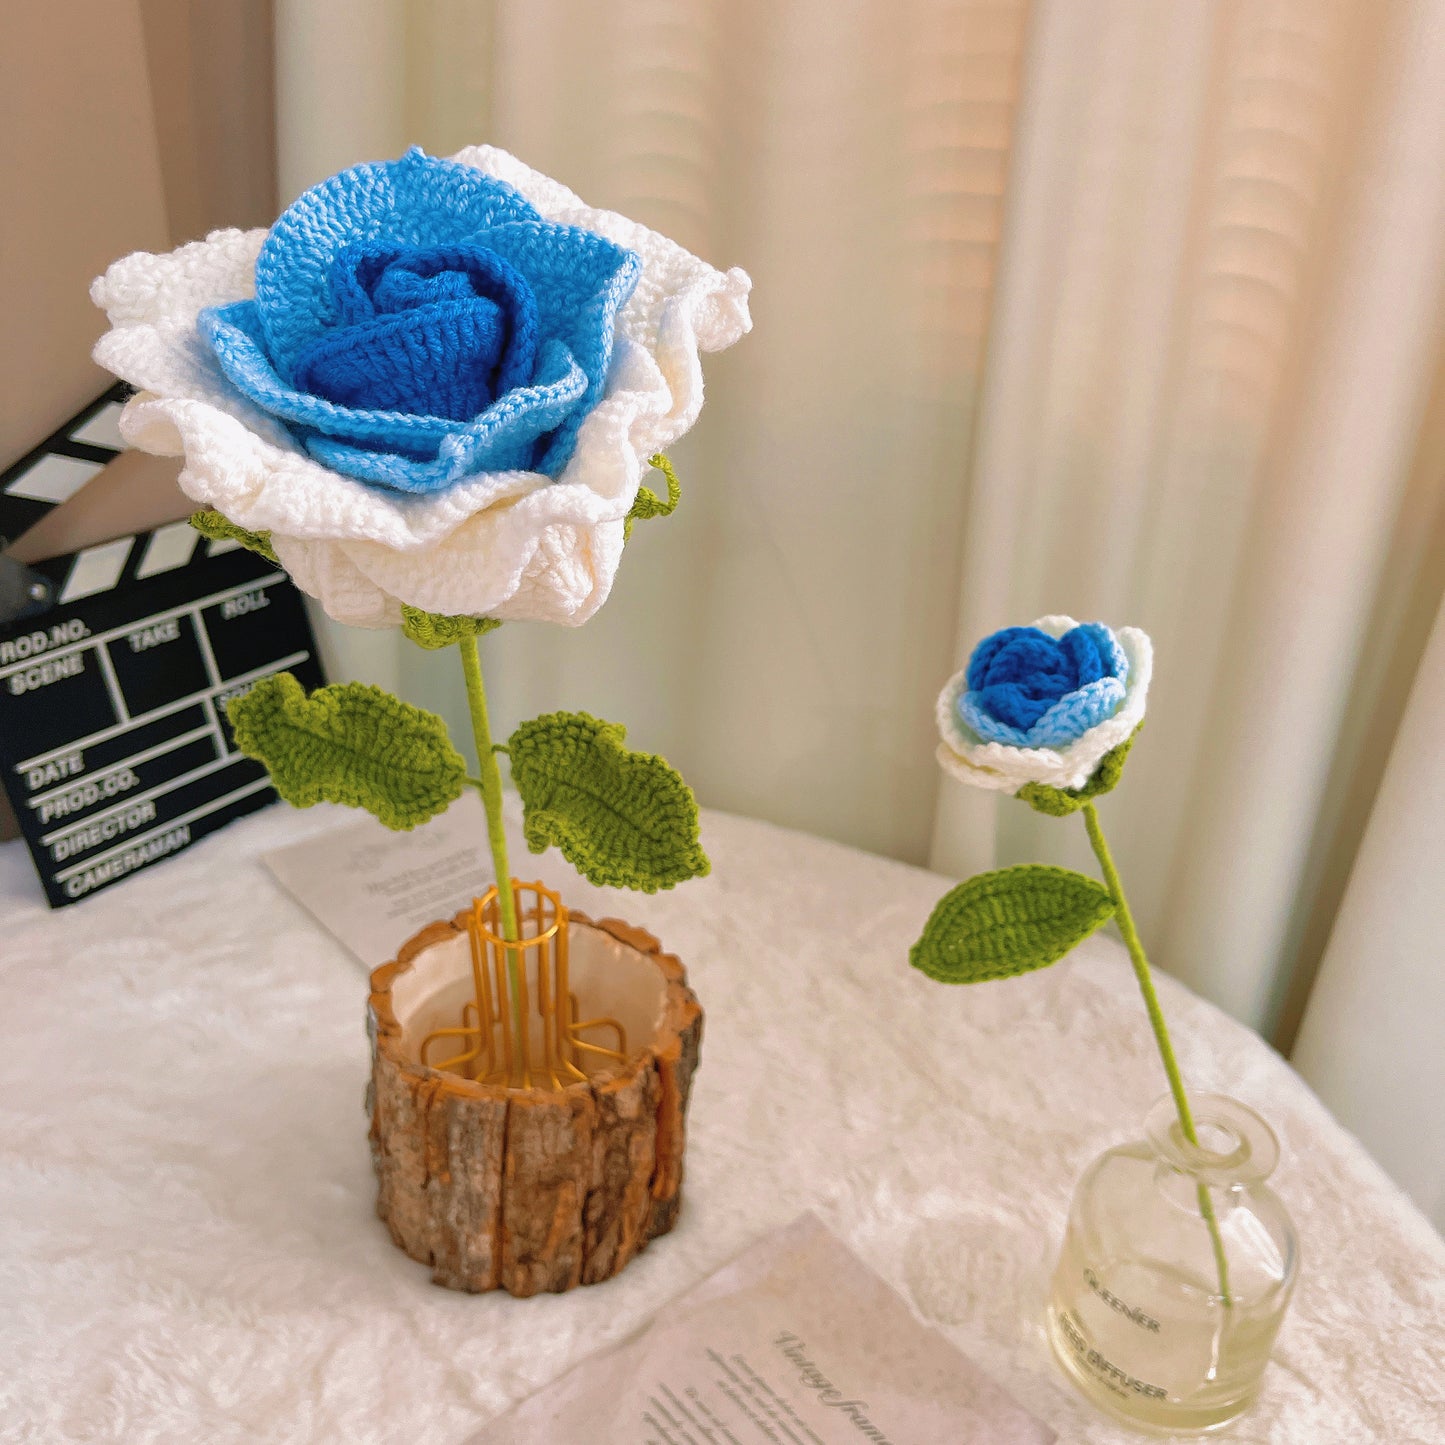 June Birth Month Rose Bouquet - Handcrafted Hooked Single Stem Birthday Flower with Baby's Breath, National Flower Celebration